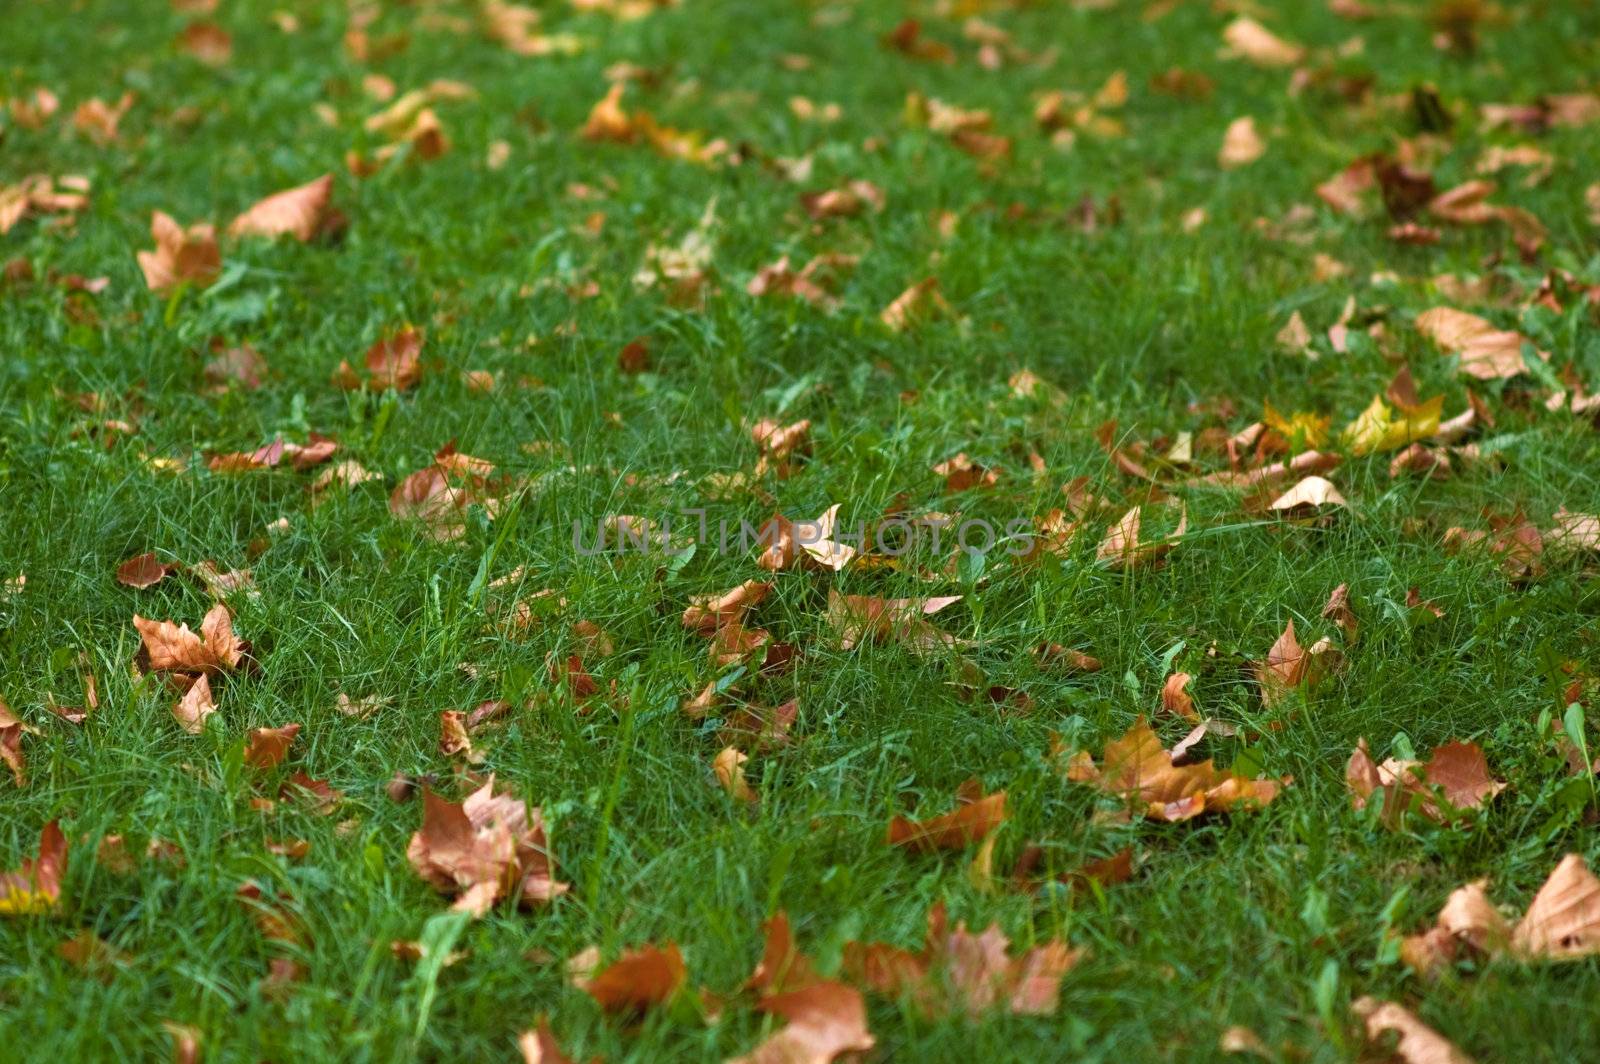 Dry yelow leaves on green grass carpet. Shallow DOF (selective focus).